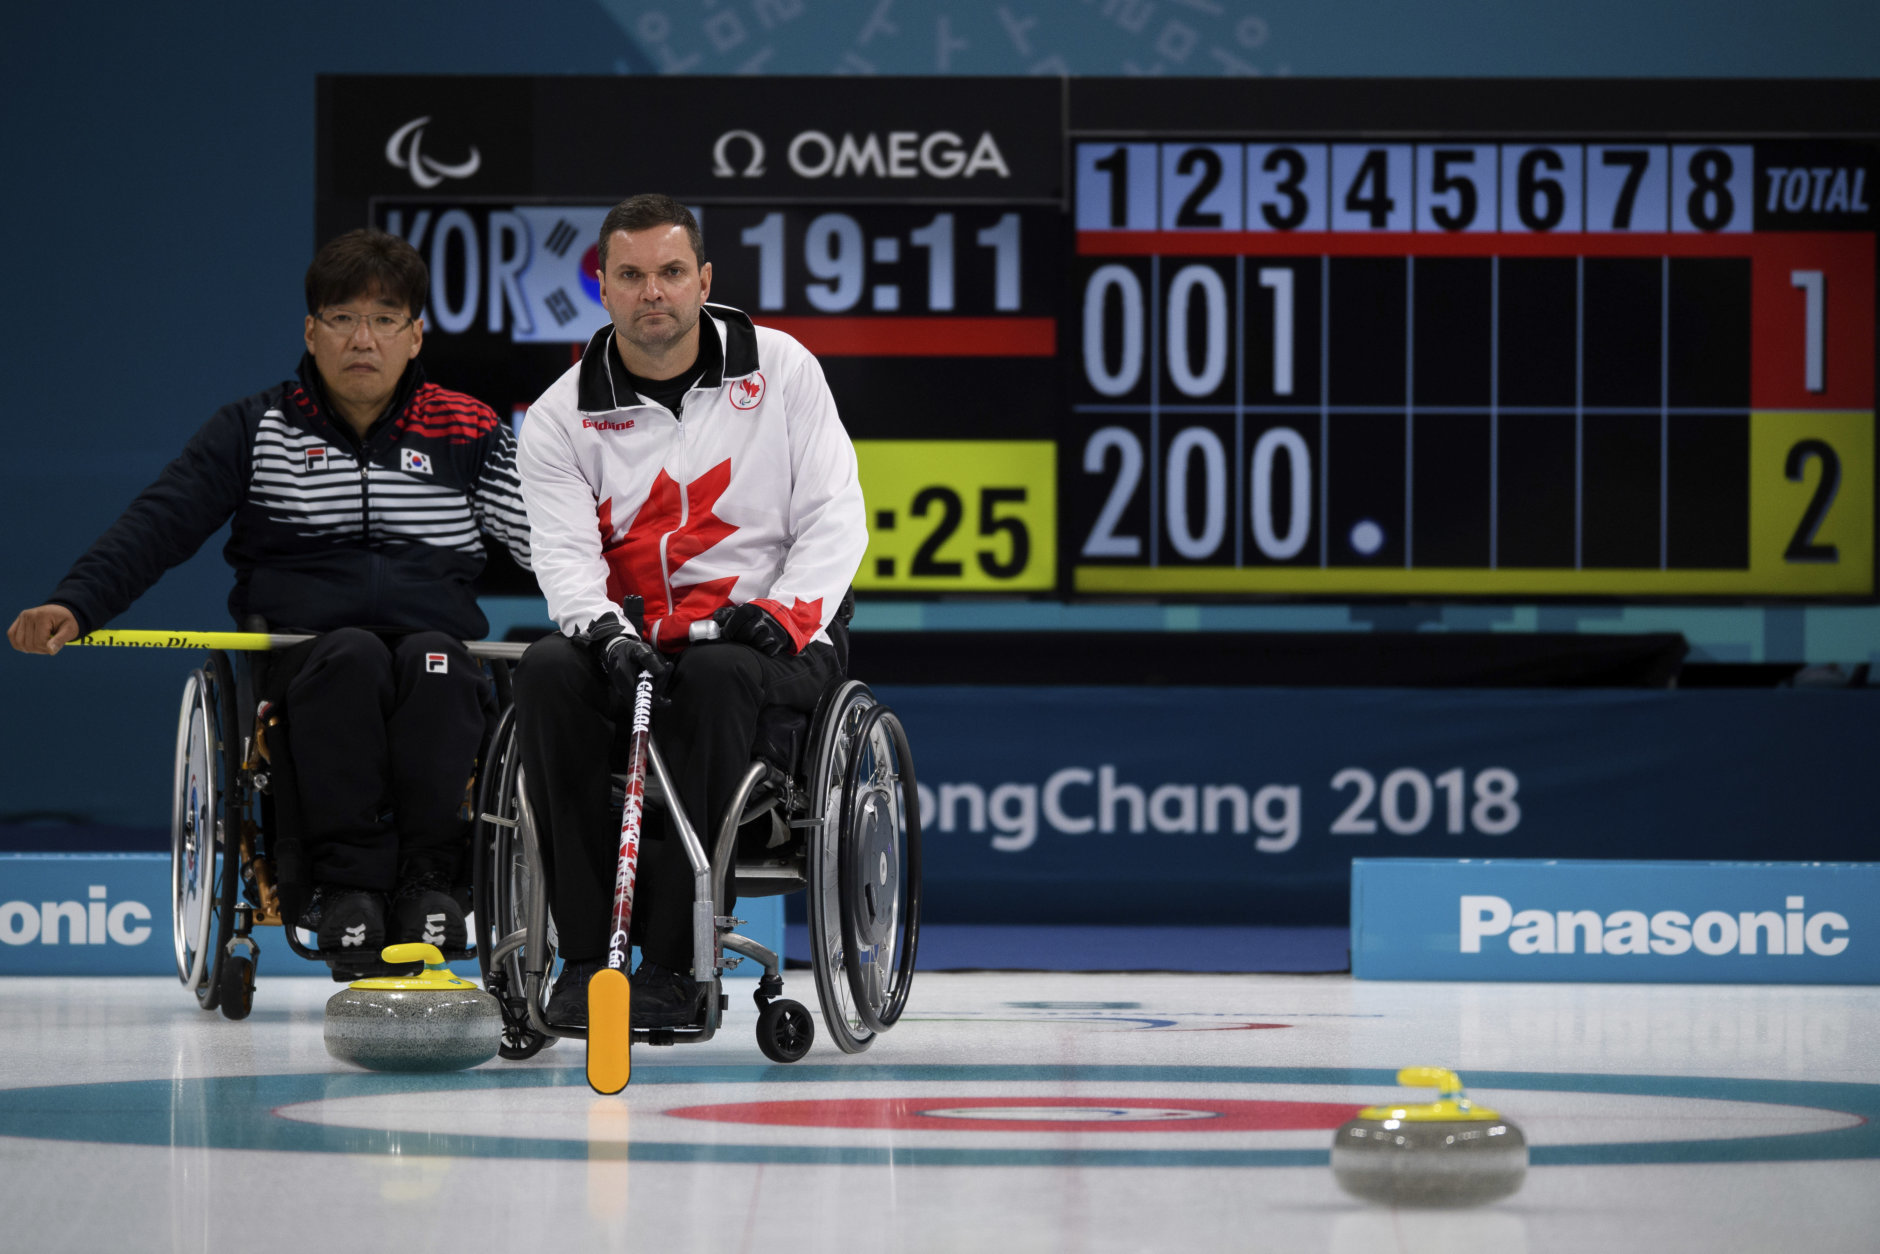 Soonseok Seo, left, of South Korea and Mark Ideson of Canada in action during the Wheelchair Curling Bronze Medal Game between South Korea and Canada at the Gangneung Curling Centre in Gangneung, South Korea at the 2018 Winter Paralympics Saturday, March 17, 2018. (Joel Marklund/OIS/IOC via AP)